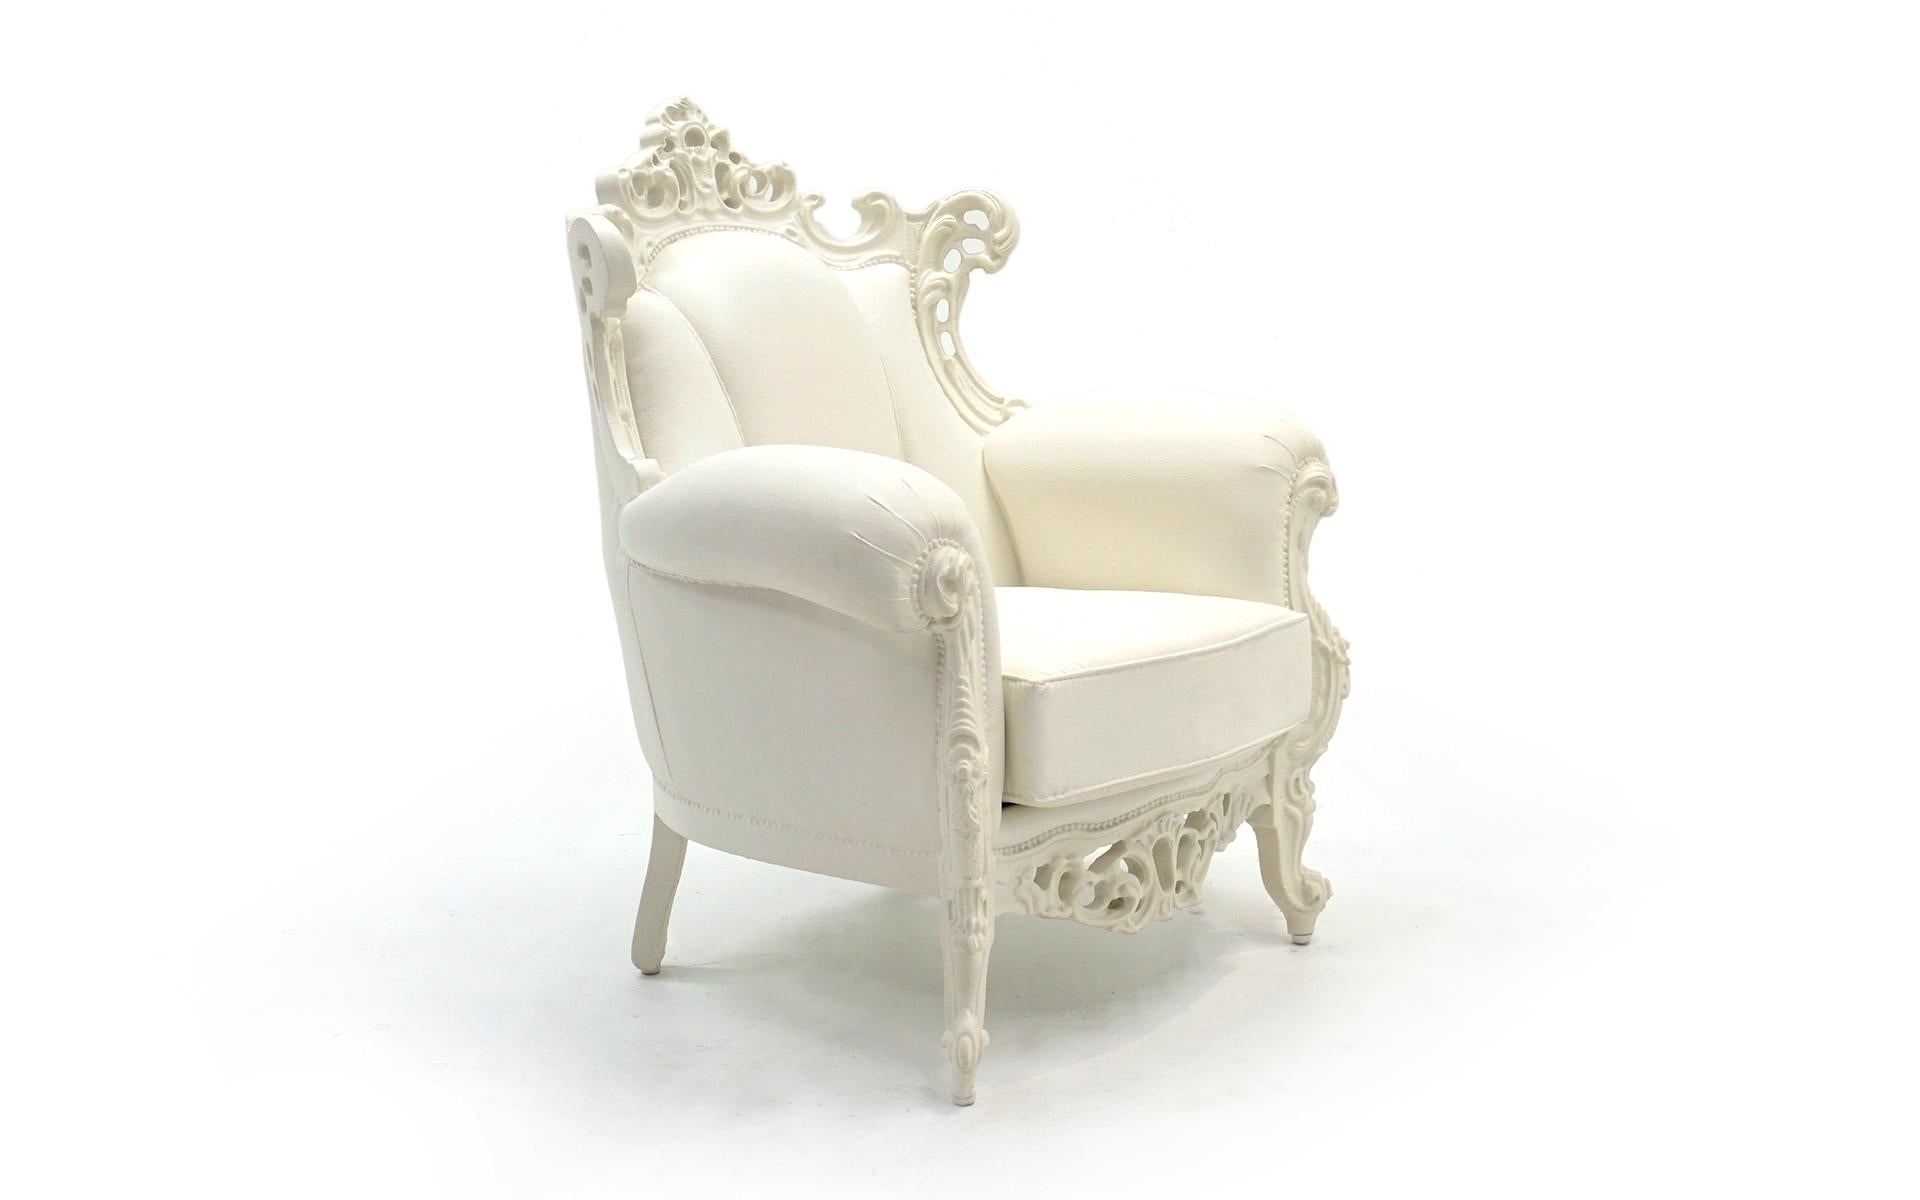 Post-Modern White Louis II Armchair by Pieter Jamart for Sixinch, Spain